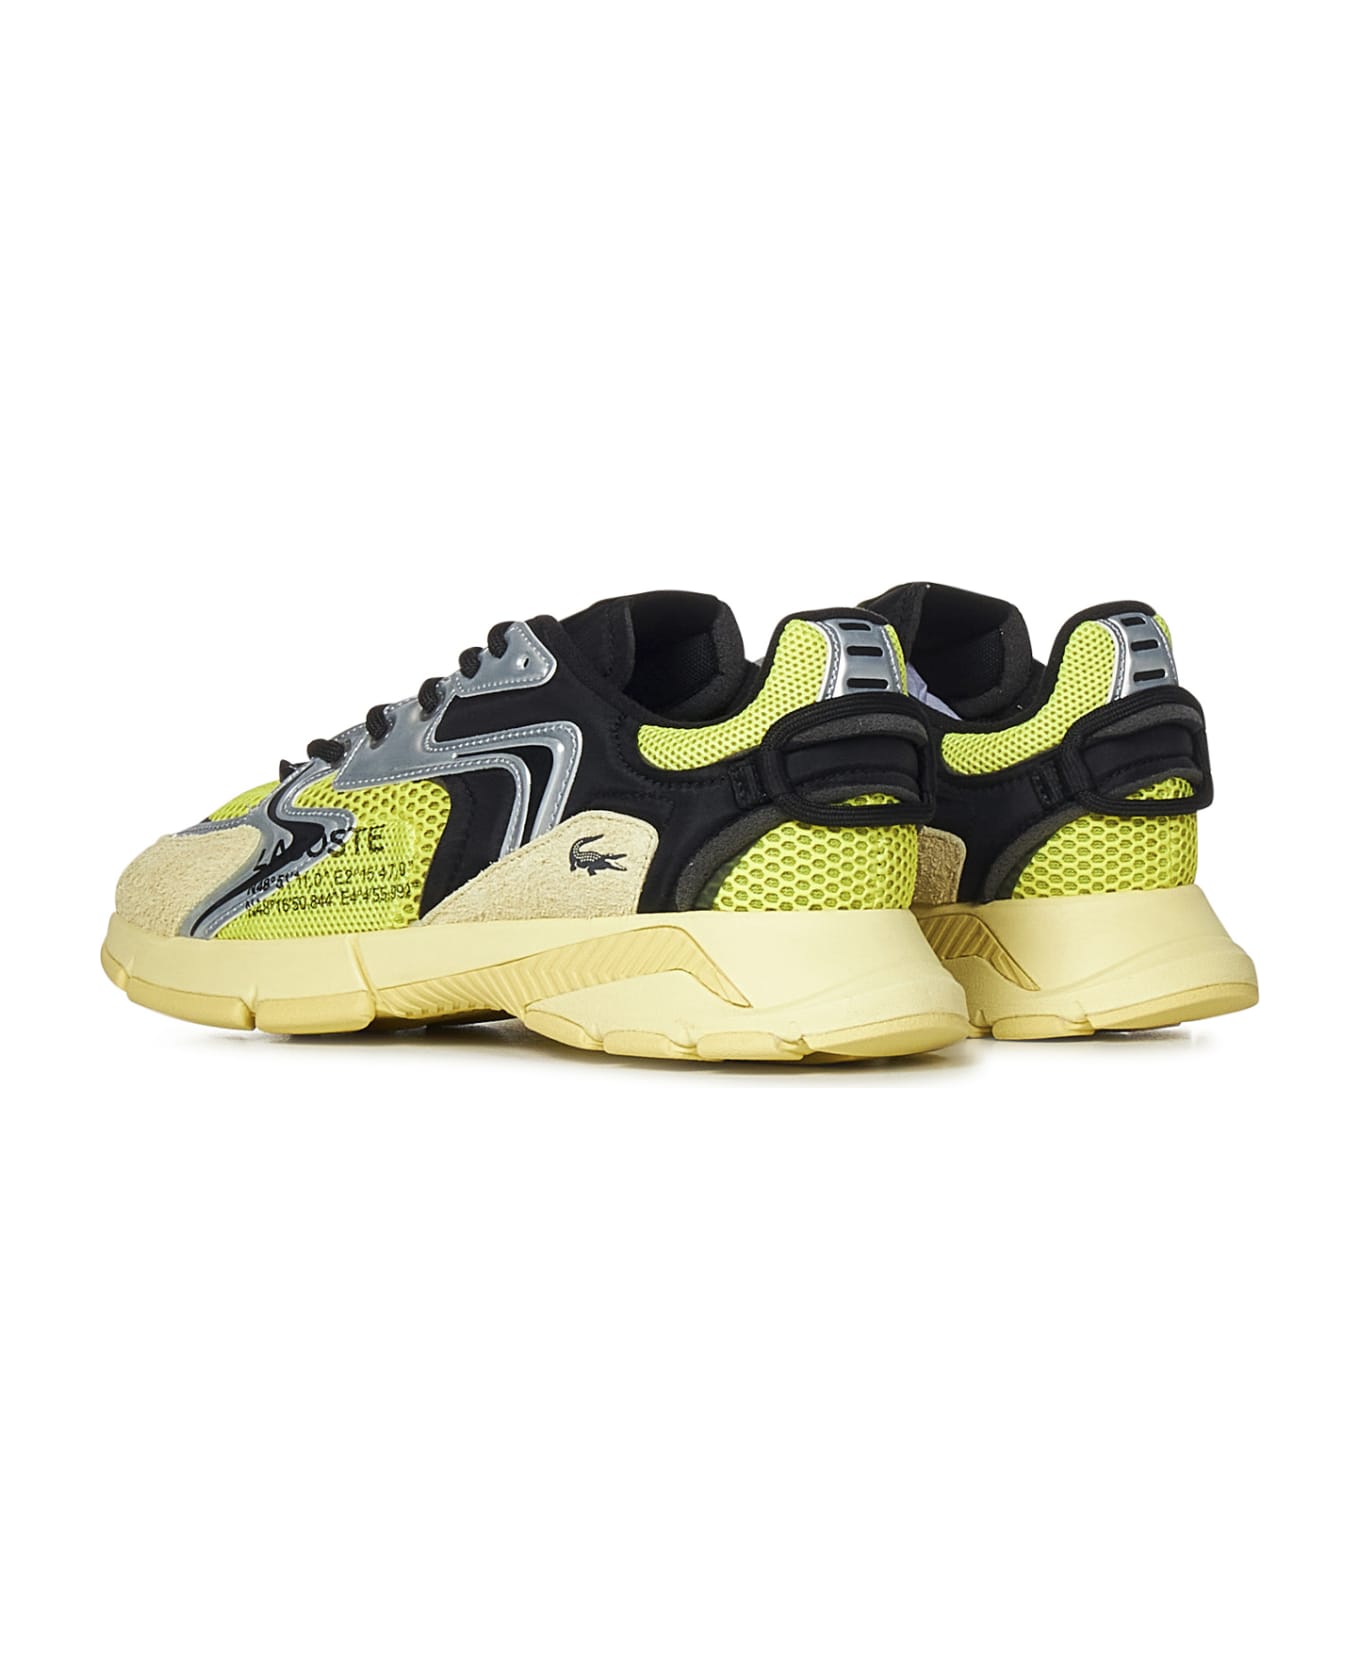 Lacoste L003 Neo Sneakers - Yellow